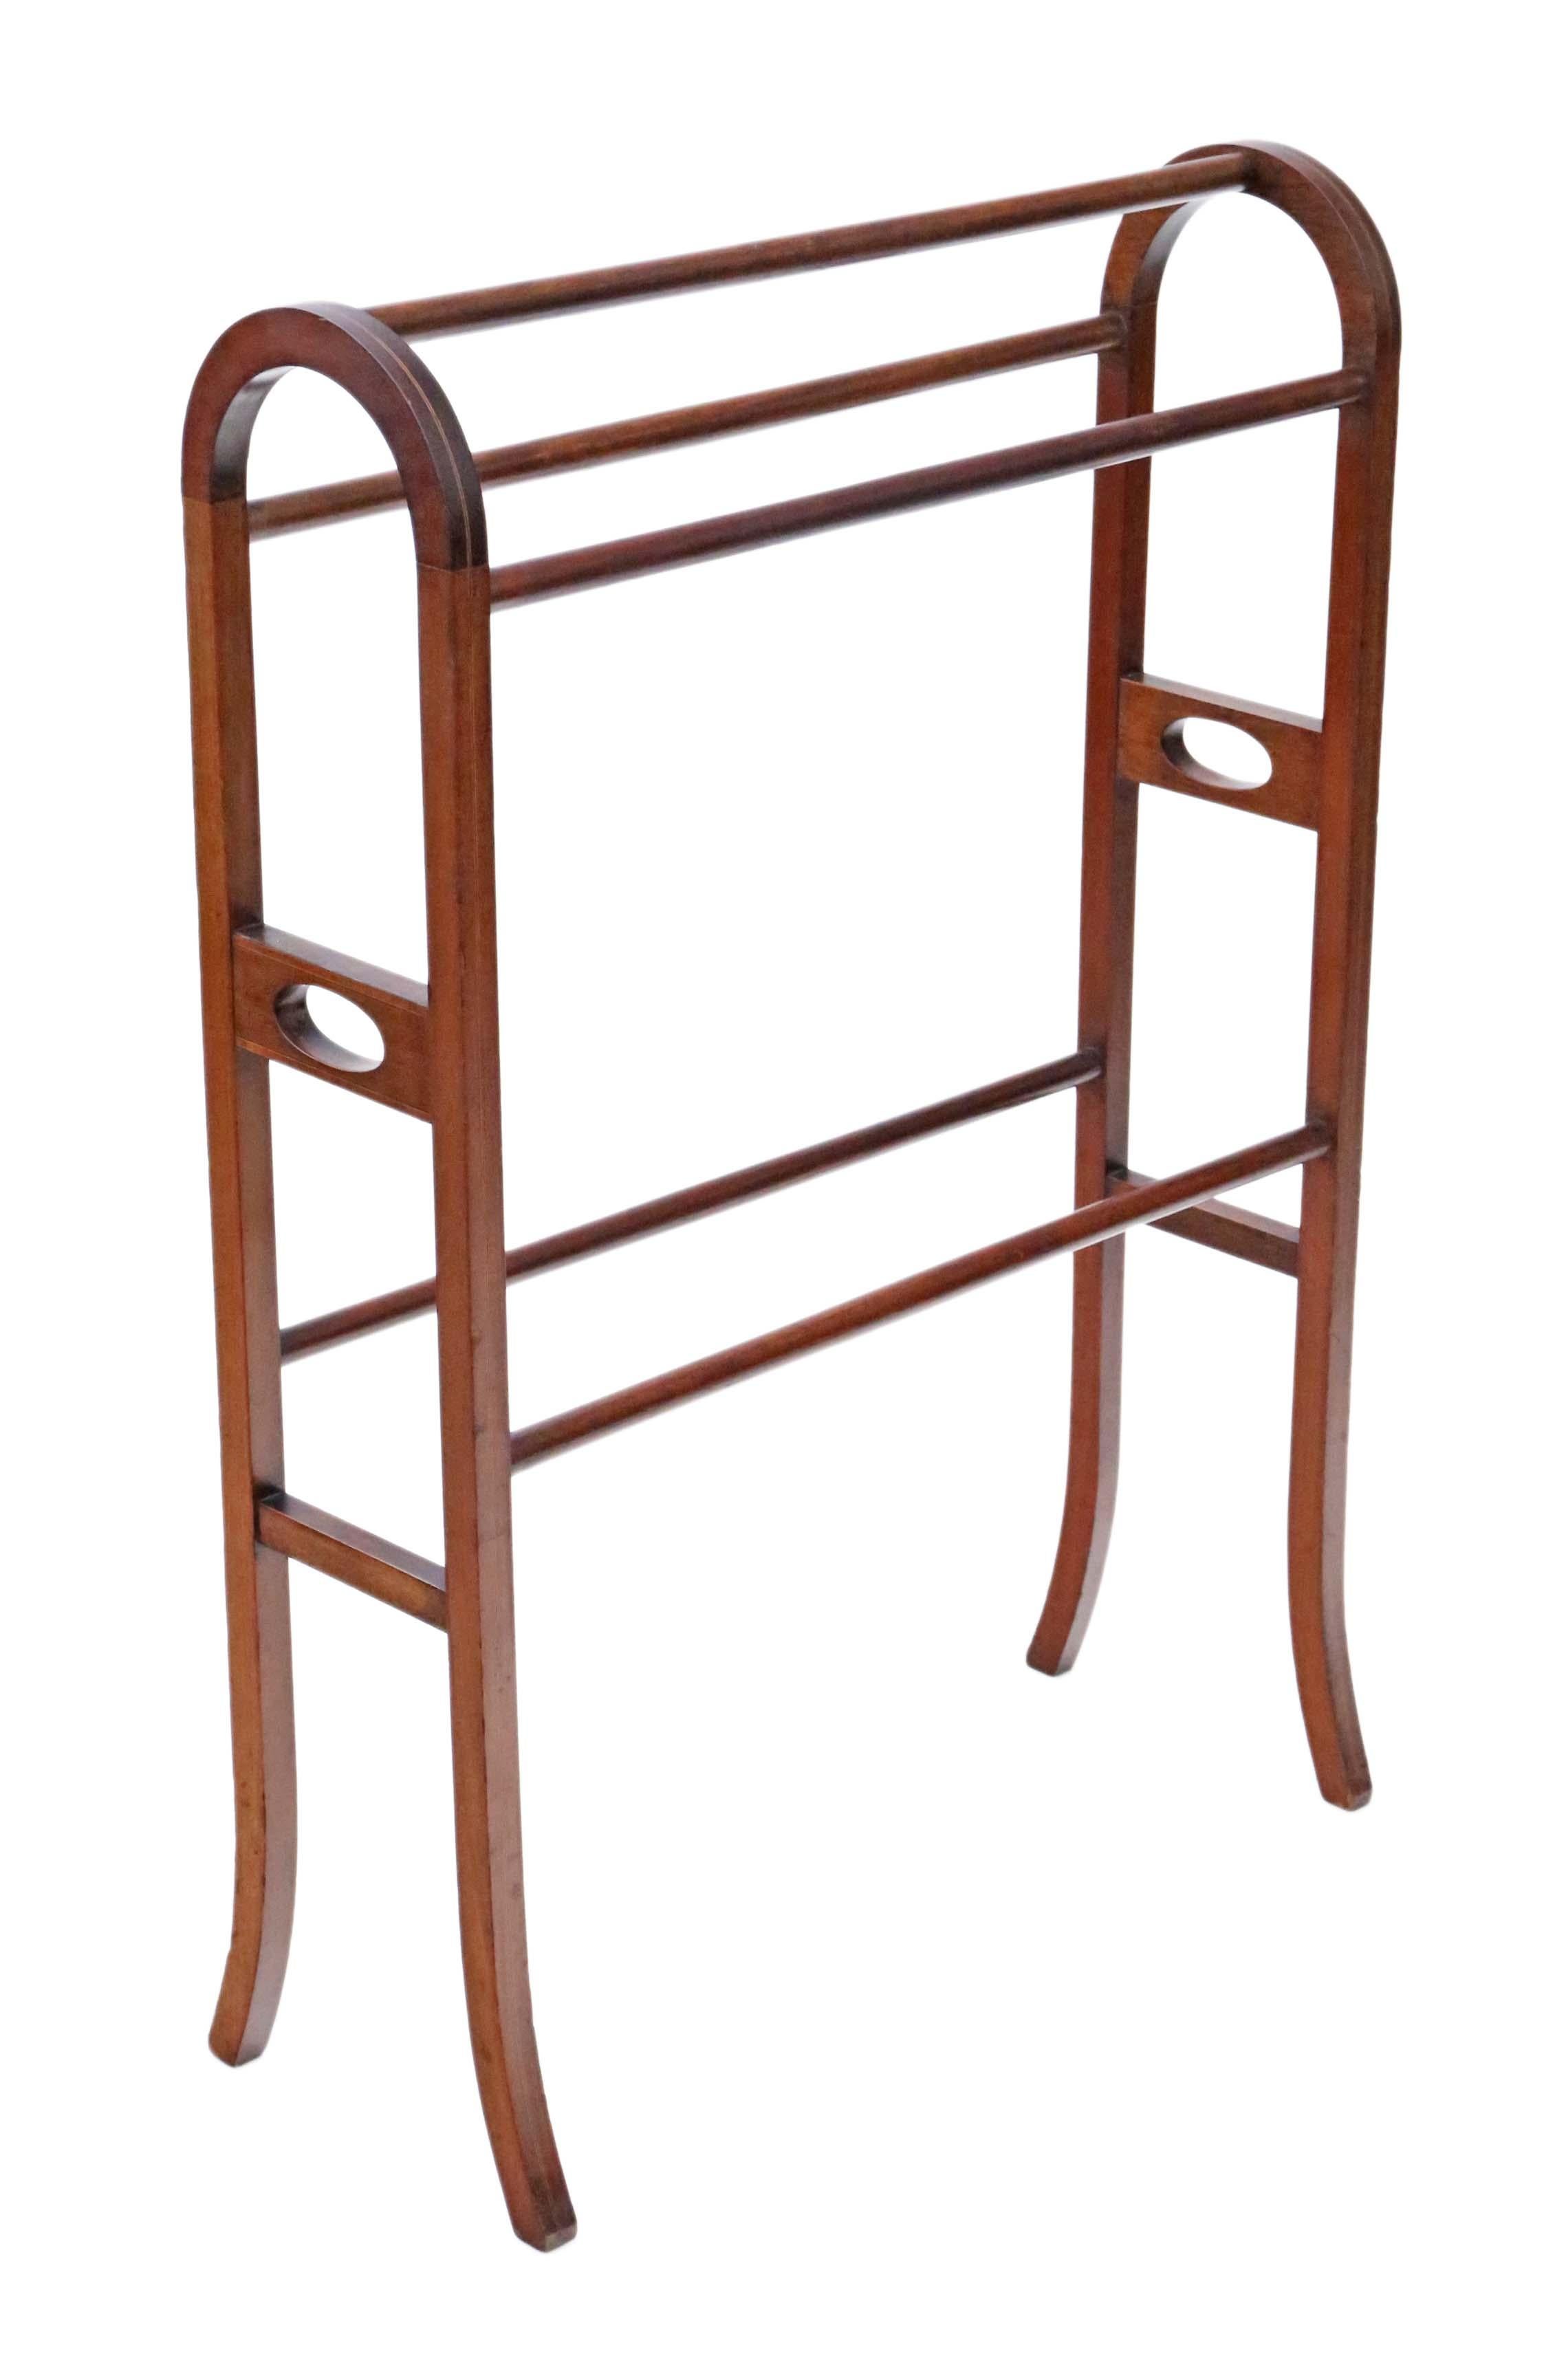 Antique quality Edwardian inlaid mahogany towel rail stand, circa 1905.

This item is solid and strong, with no loose joints.

No woodworm.

Would look amazing in the right location!

Overall maximum dimensions:

67cm W x 27cm D x 96cm